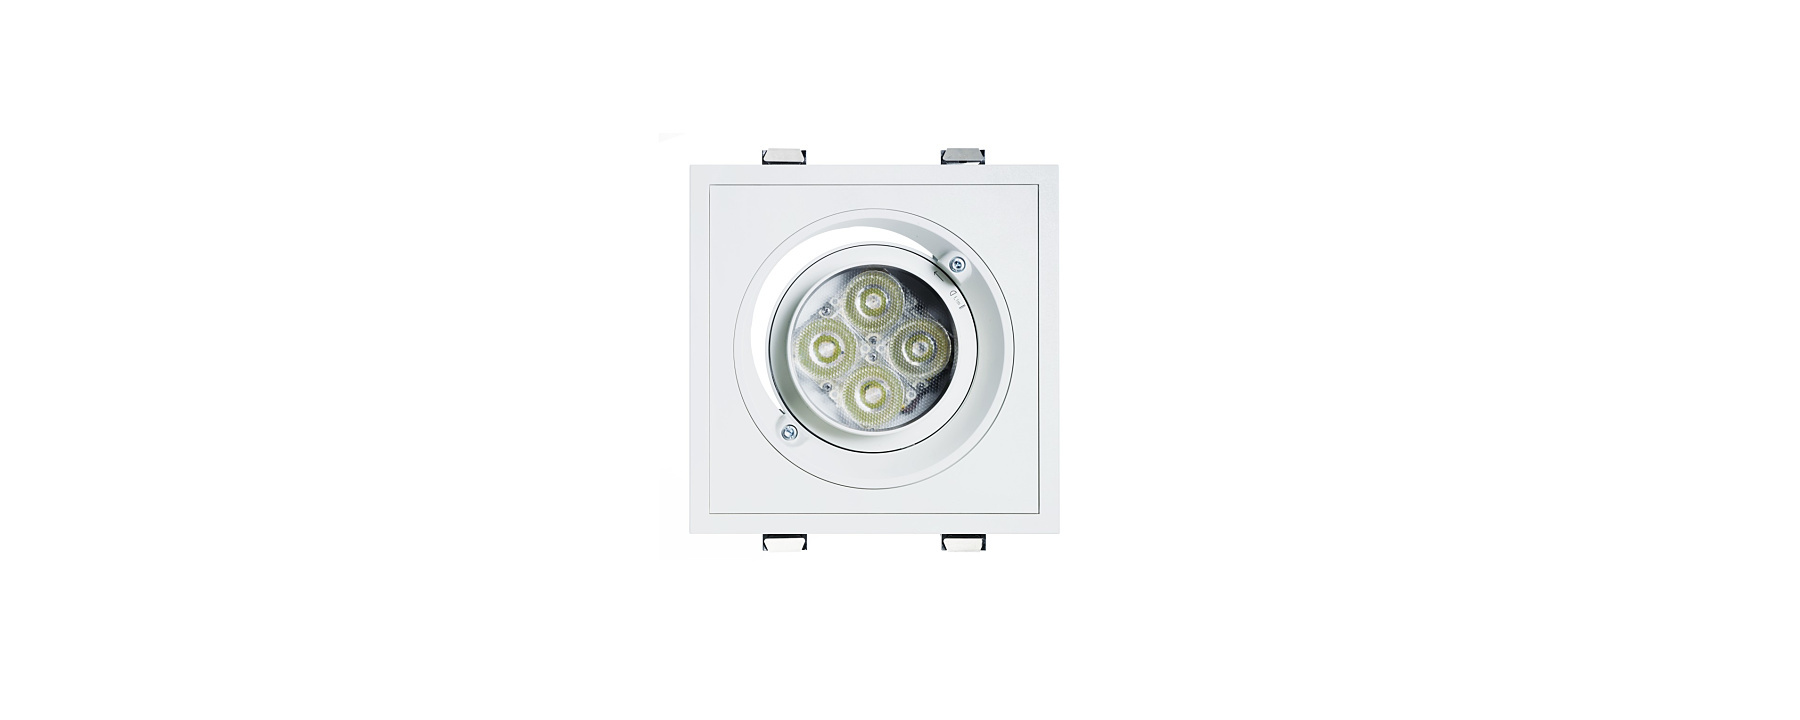 Quintessence square - Recessed spotlights, recessed floodlights and recessed wallwashers